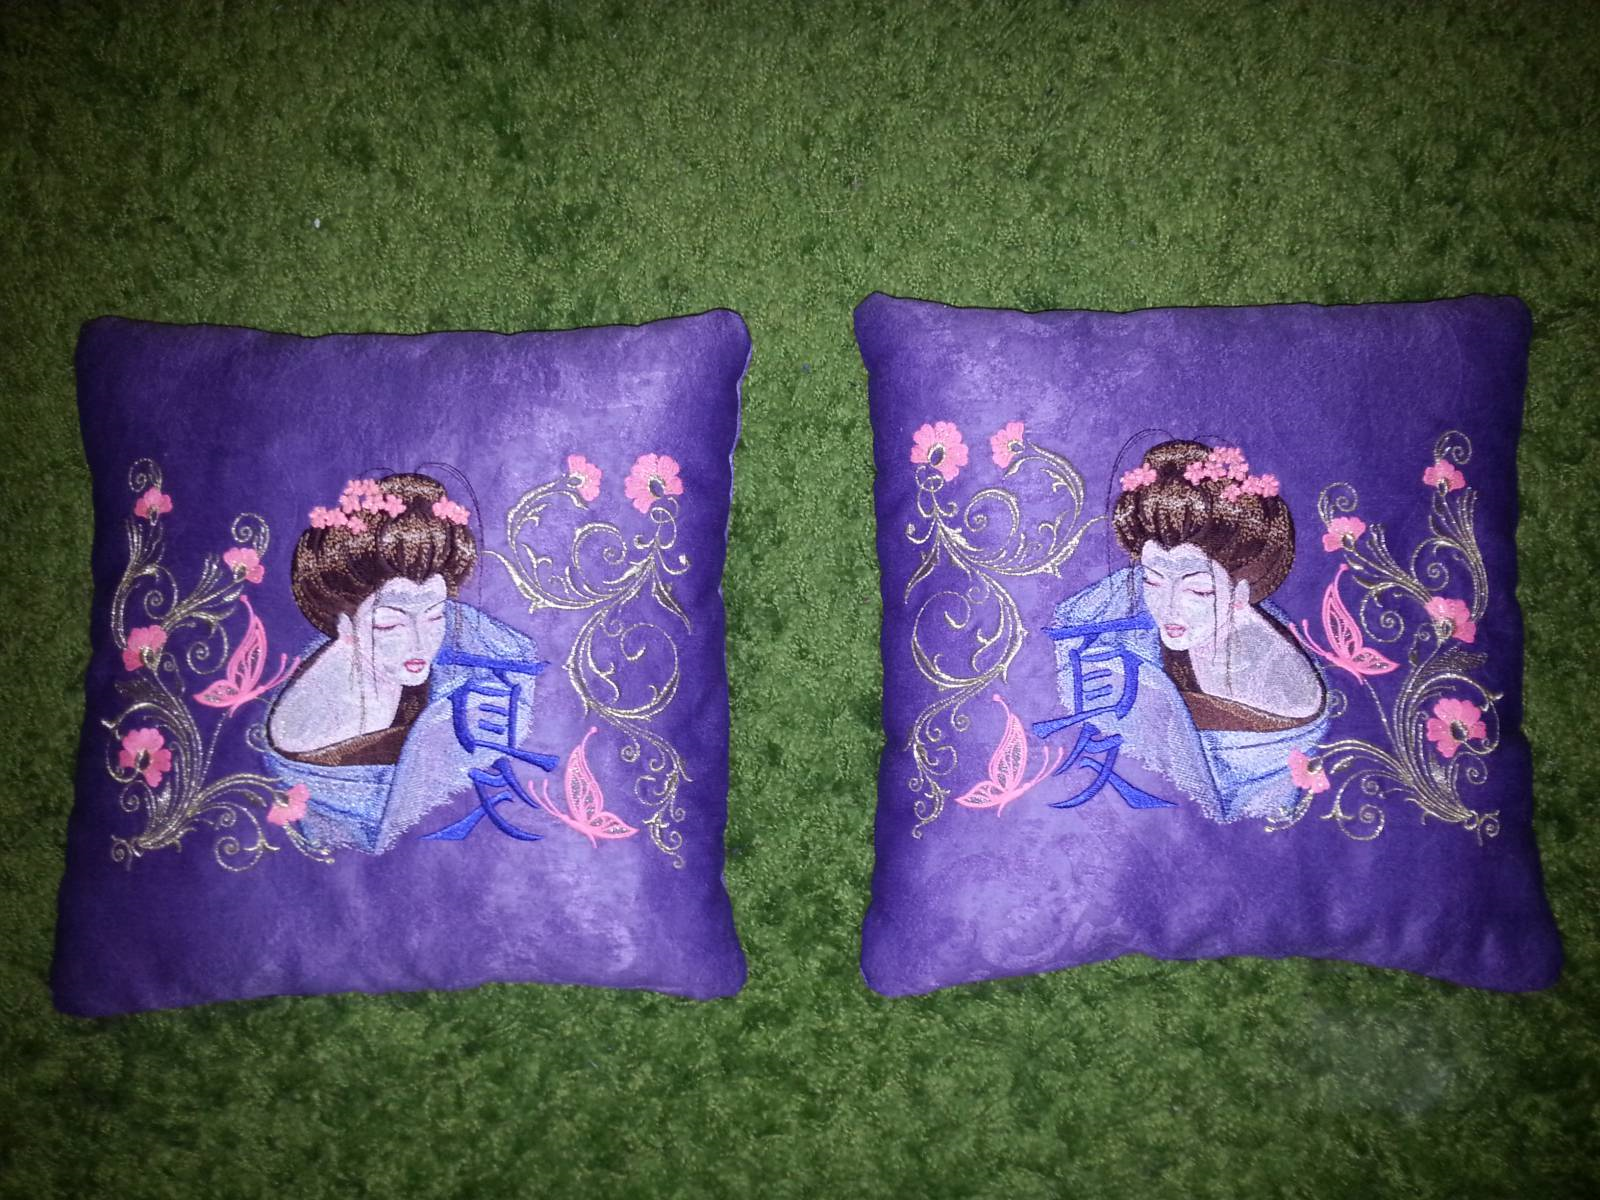 Silk cushions with Geisha with Hieroglyphic embroidery design